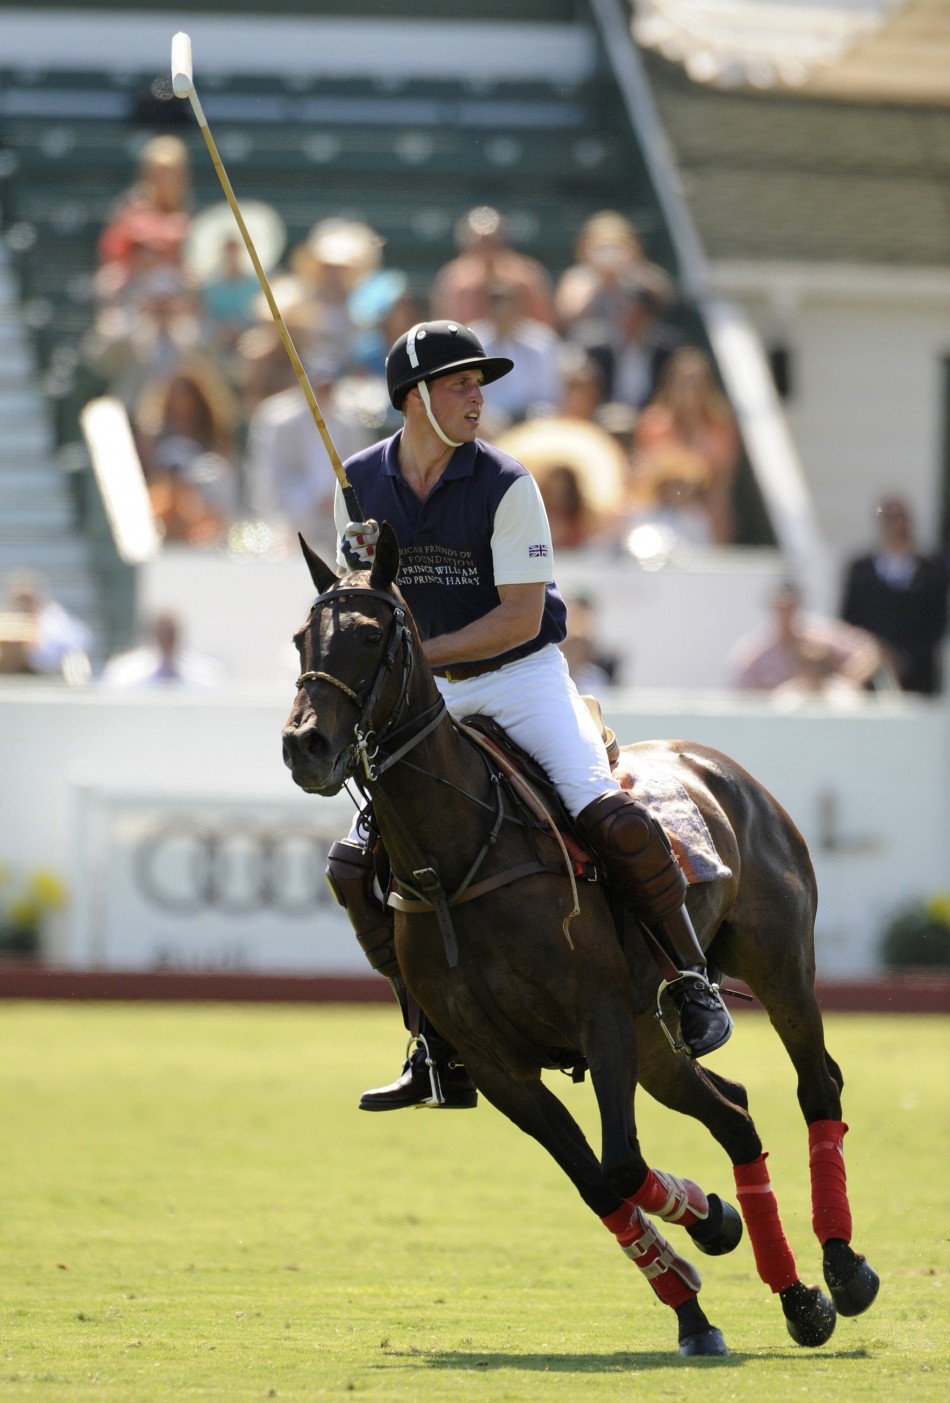 Prince William plays in a polo match at the Santa Barbara Polo and Racquet Club for a charity event held in support of the American Friends of The Foundation of Prince William and Prince Harry in Santa Barbara, California July 9, 2011